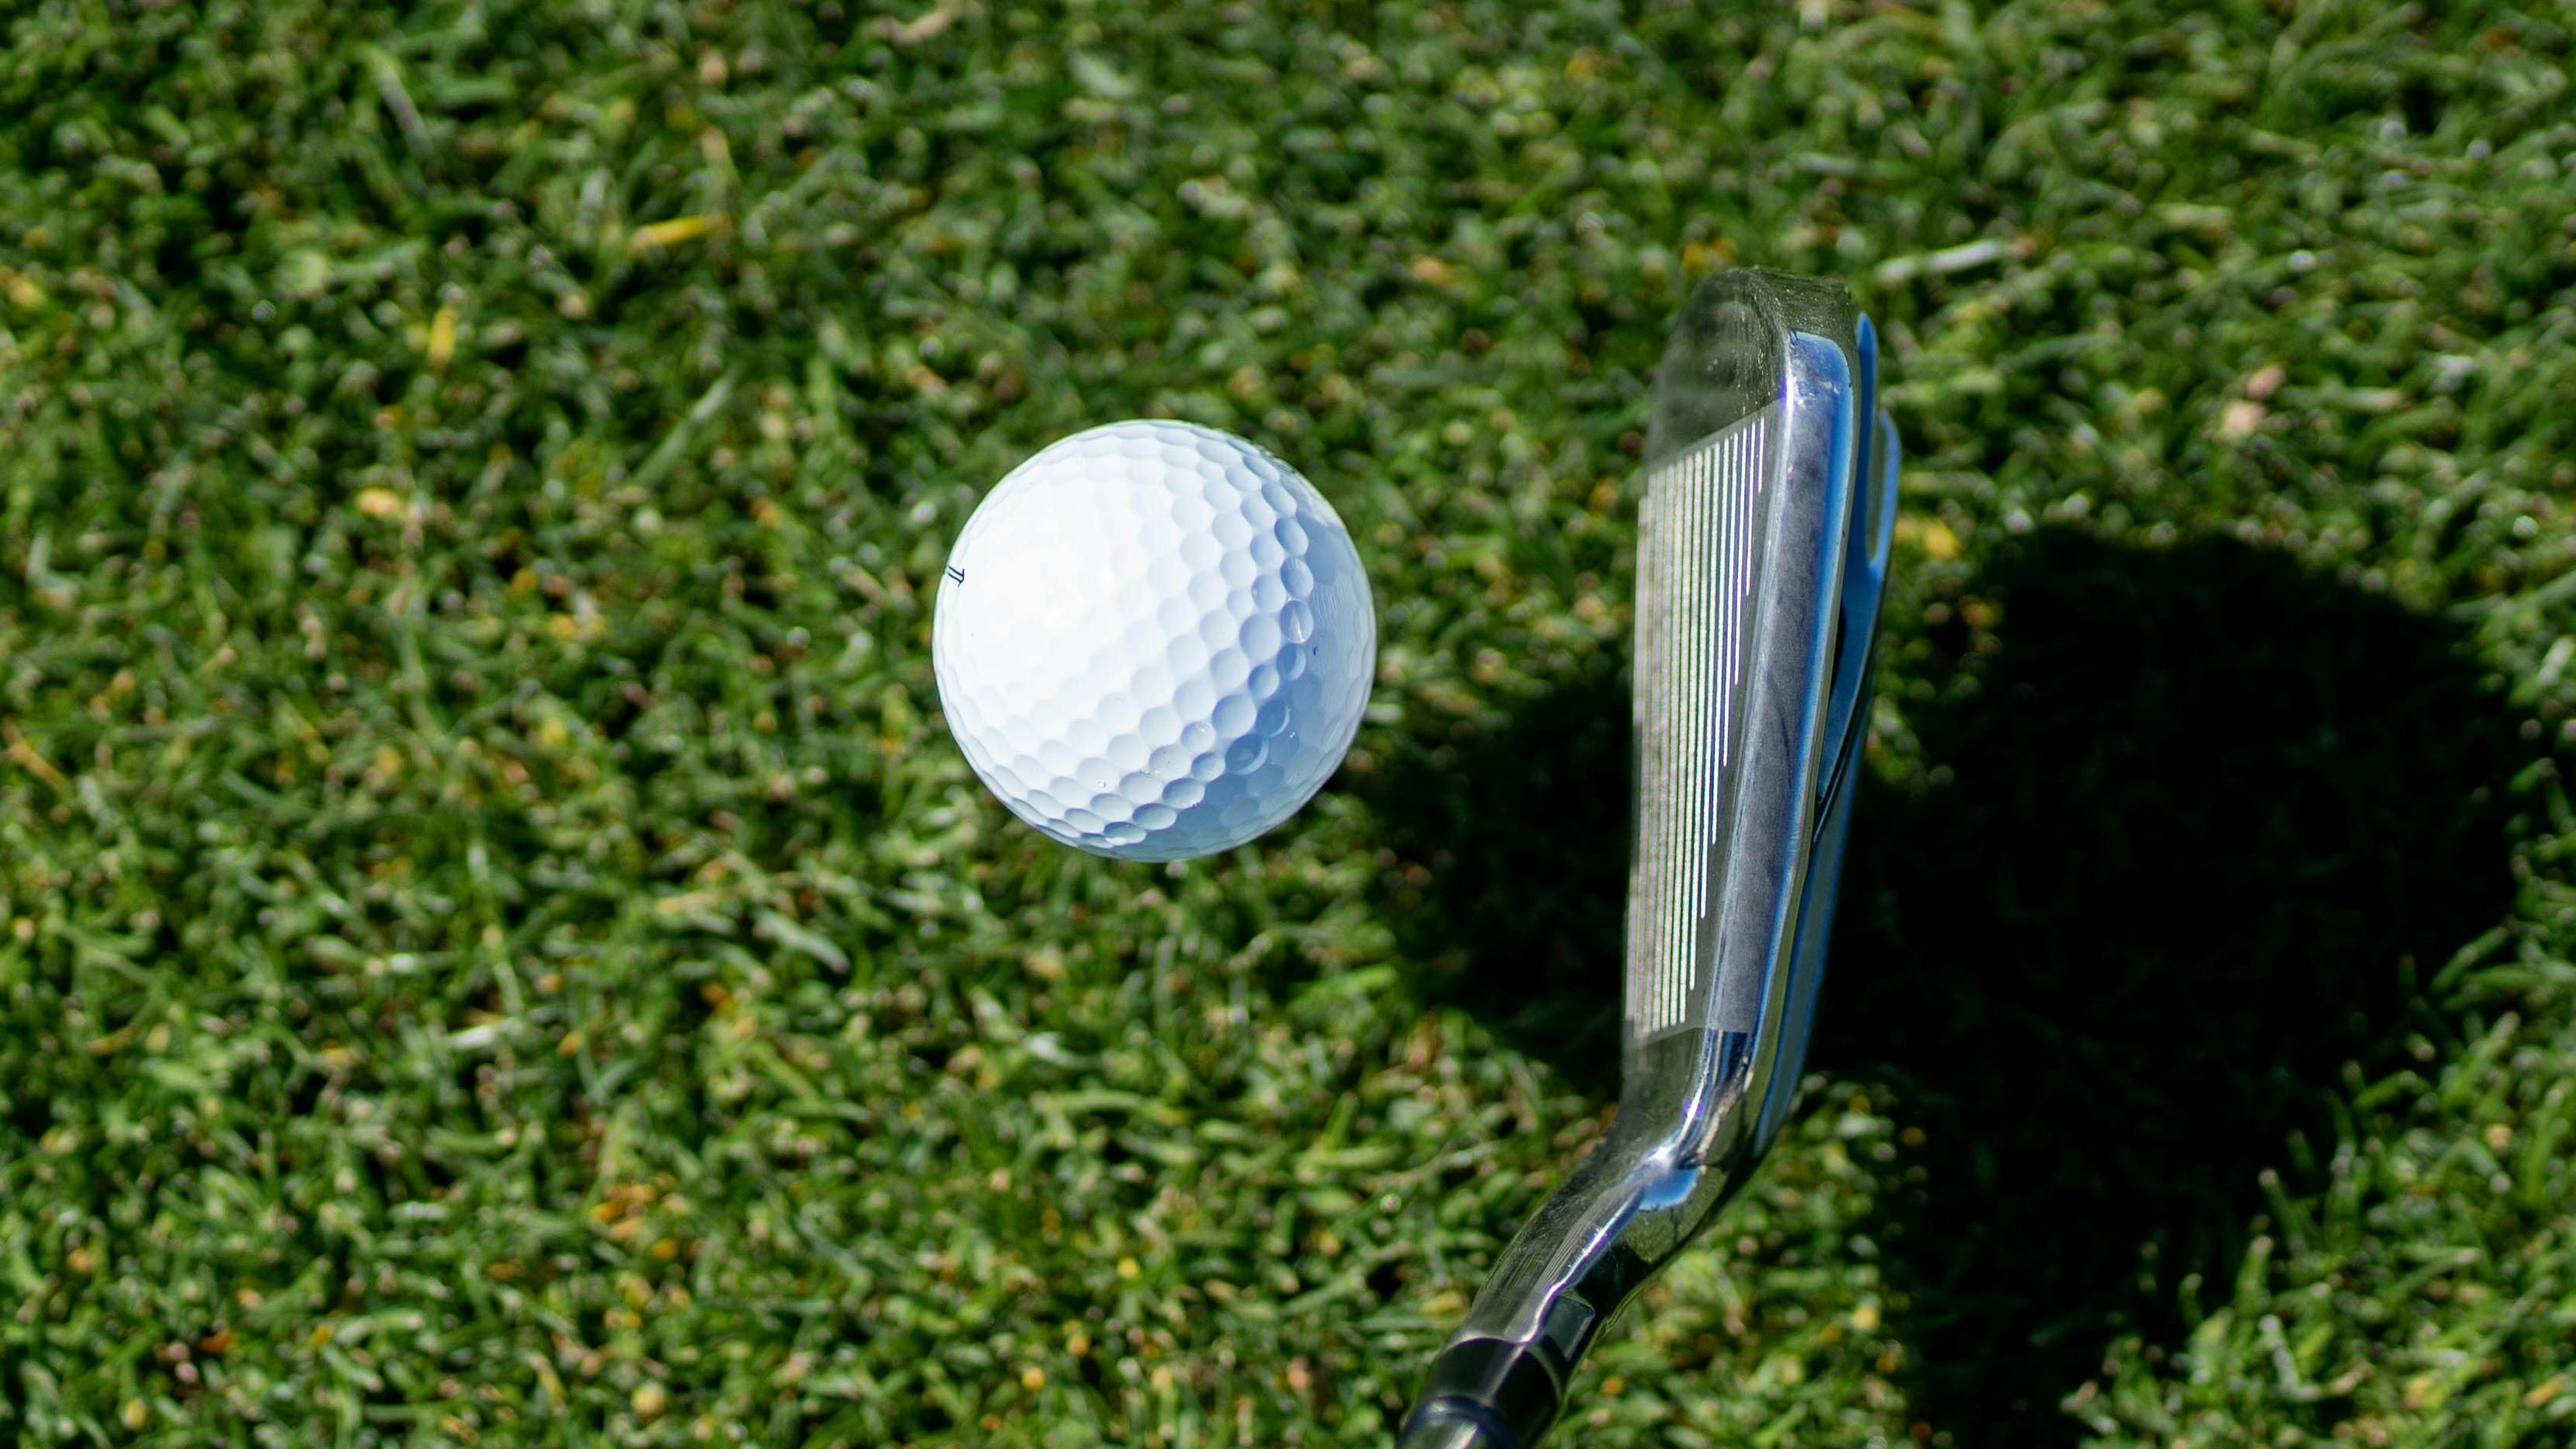 Golf ball teed up for tee shot with iron